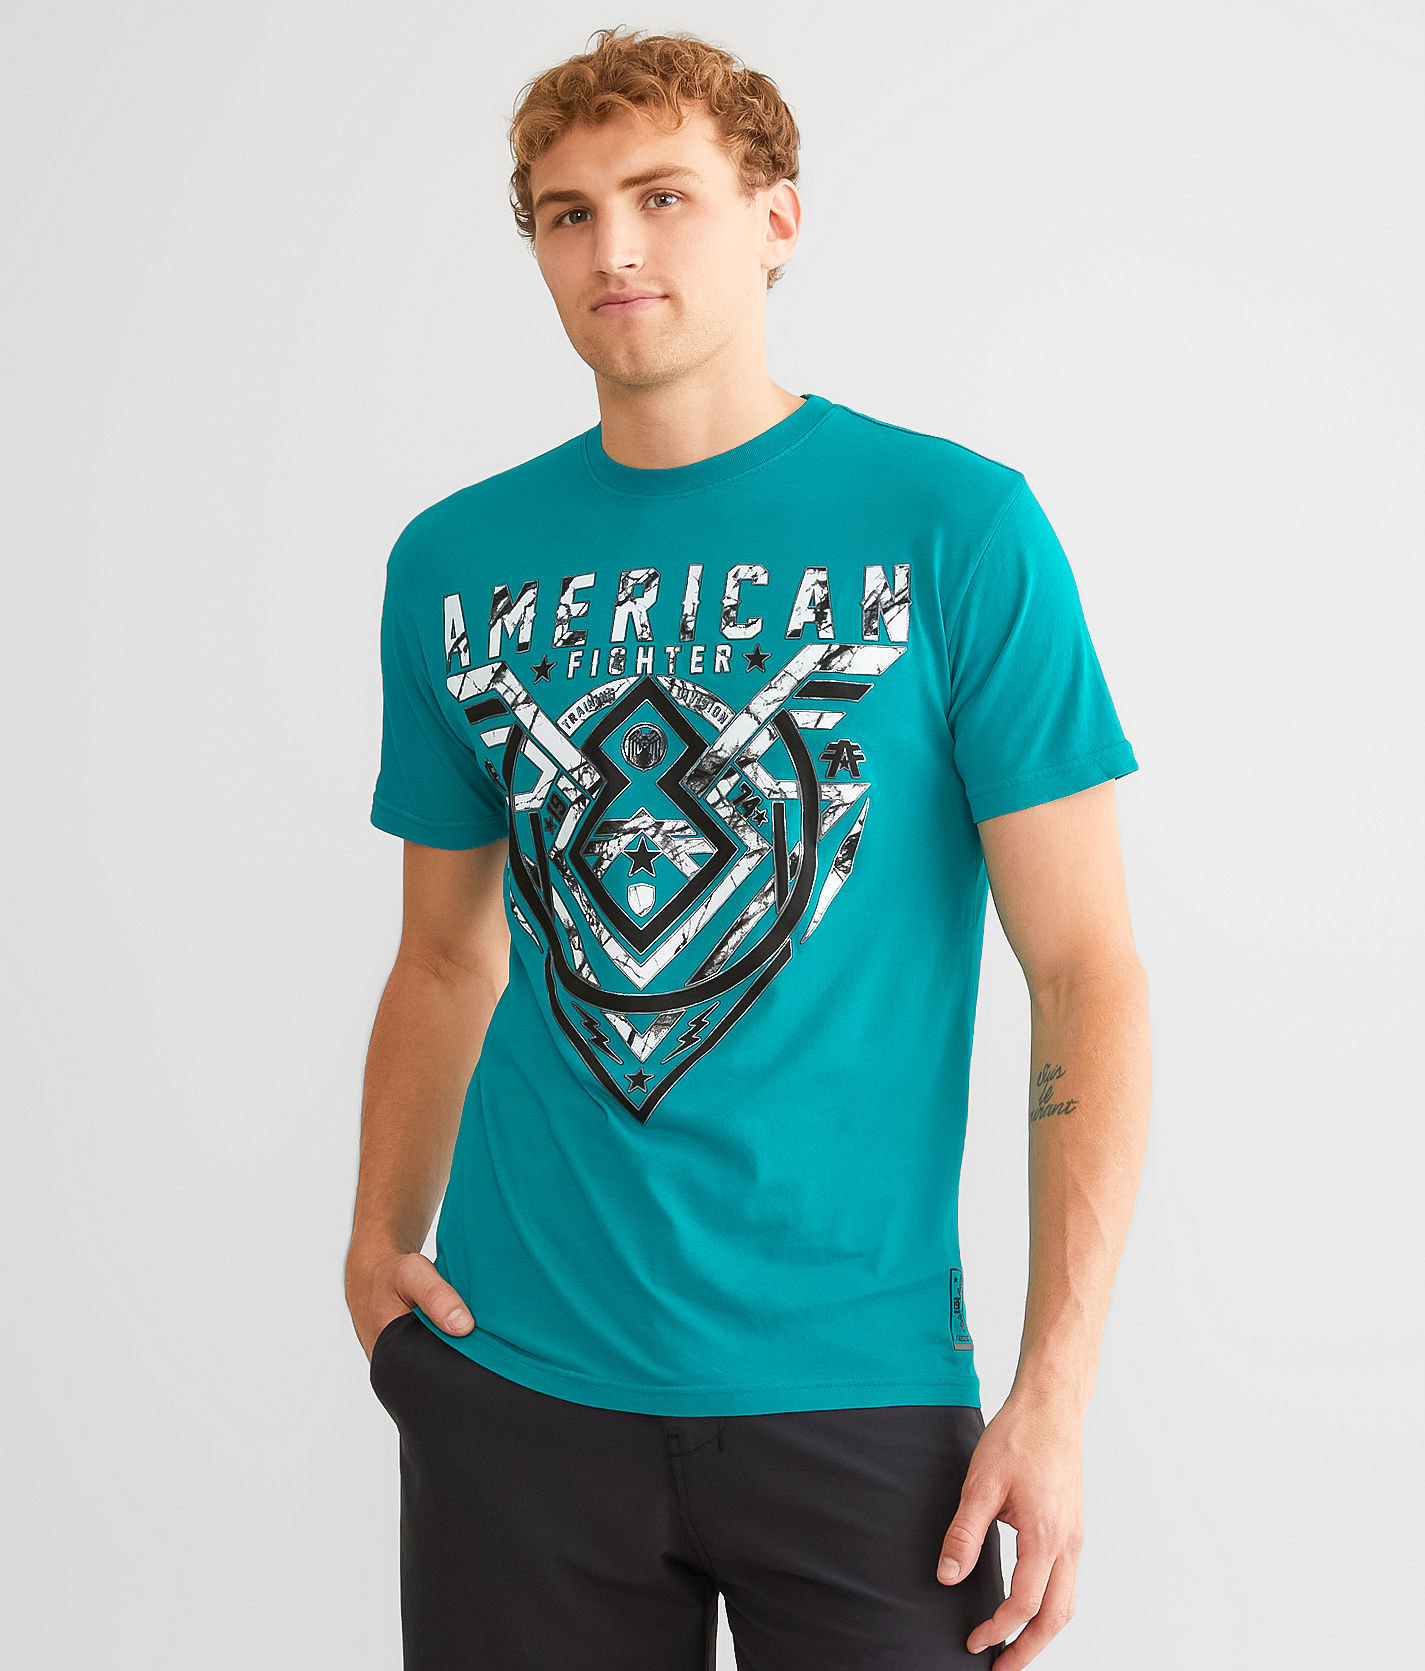 American Fighter Oakview T-Shirt - Men's T-Shirts in Pine Green